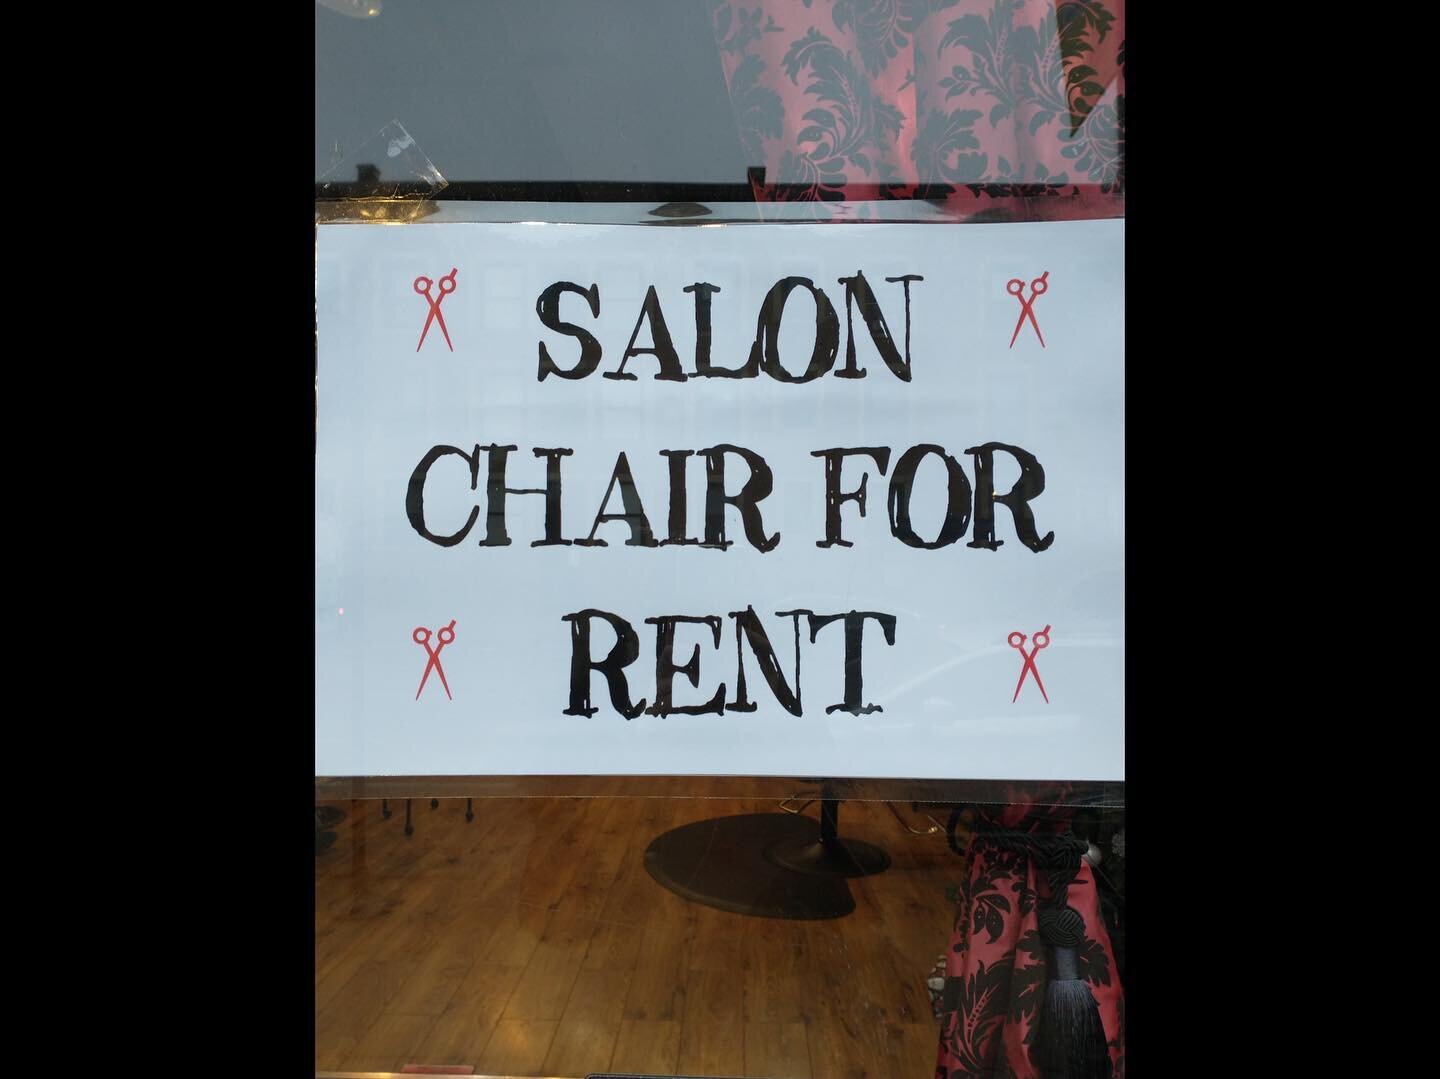 Hey everyone, I have a salon chair available for rent.  We have a nice laid back atmosphere with growth opportunities, flexibility and a place to be creative. Please contact Kristyn at 773-654-3368, or DM me for details. I look forward to hearing fro